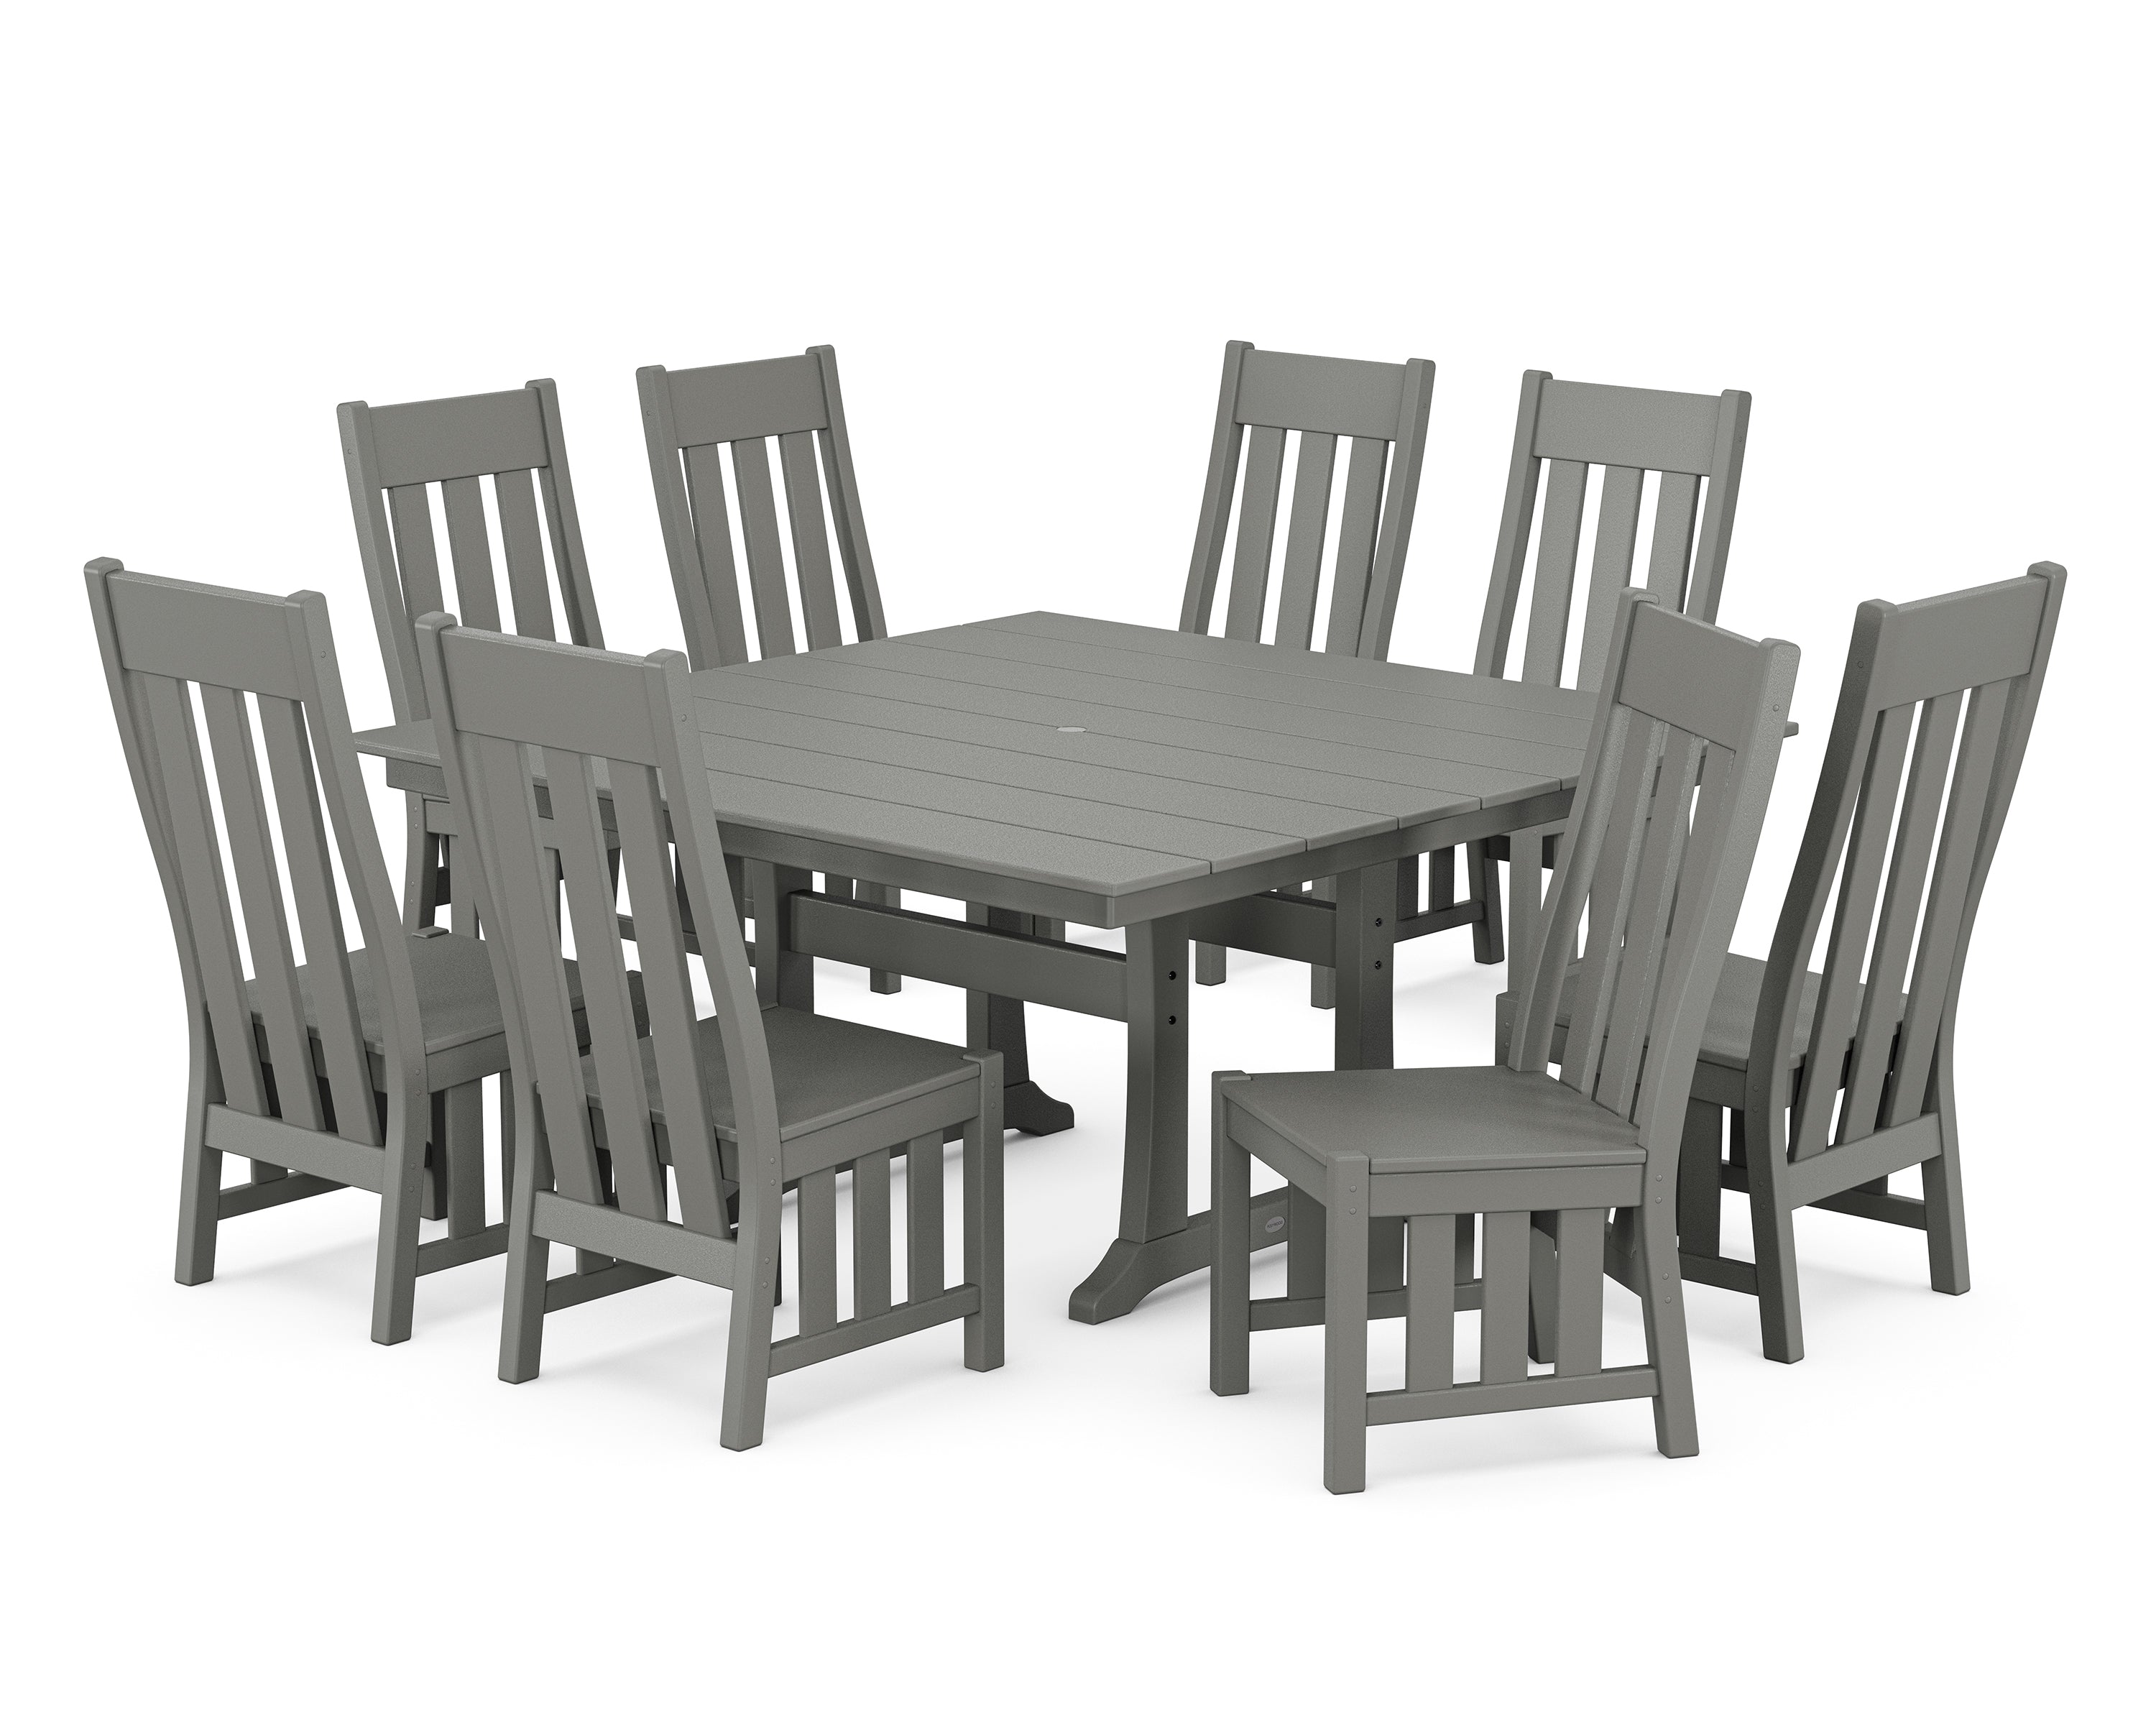 Martha Stewart by POLYWOOD® Acadia Side Chair 9-Piece Square Farmhouse Dining Set with Trestle Legs in Slate Grey